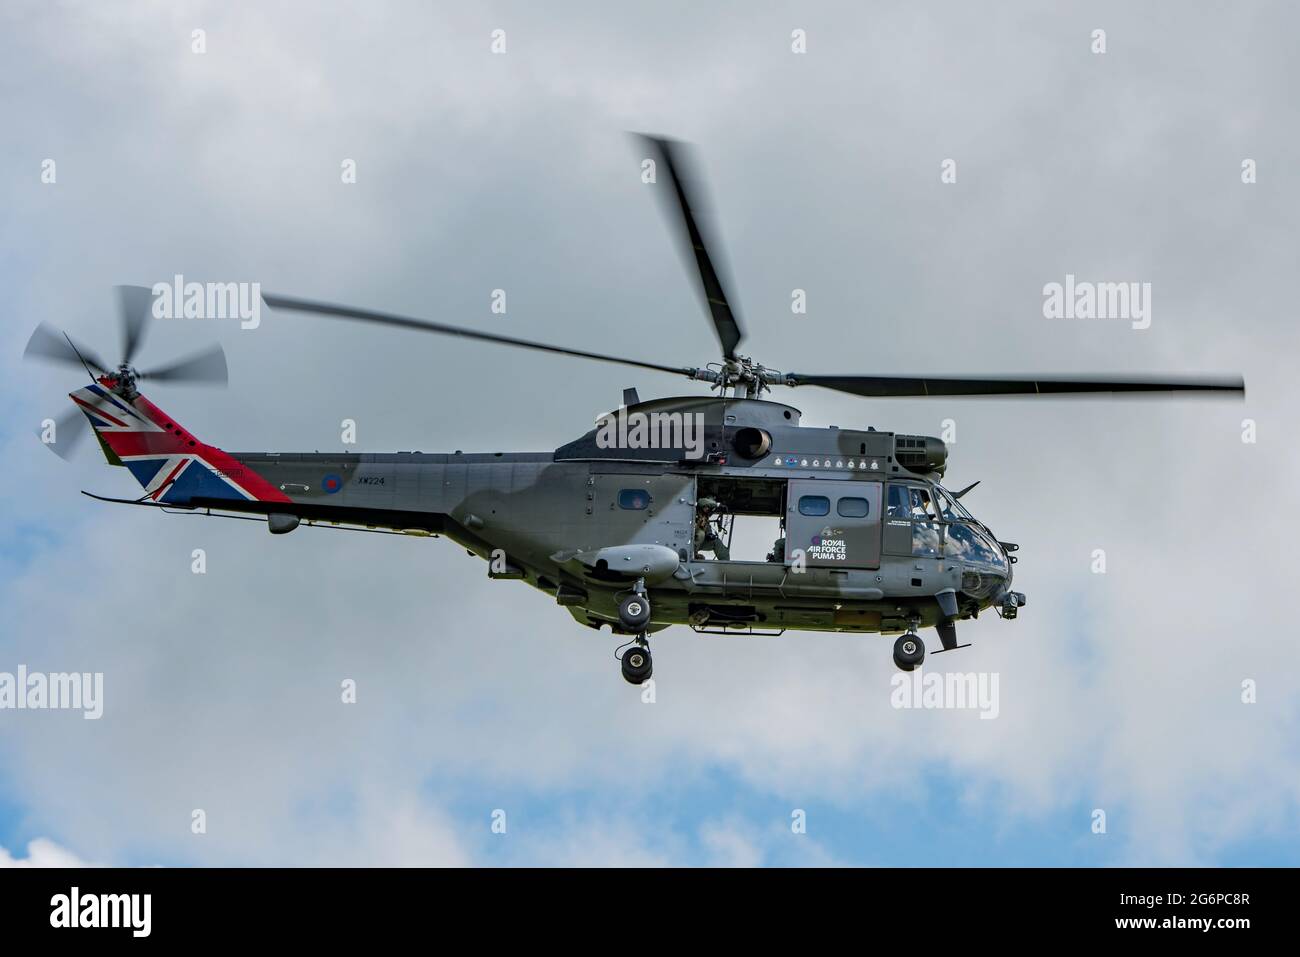 RAF Puma helicopter taking off from AAC Middle Wallop as part of the 50th Anniversary flying tour of the UK. Aircraft has union jack tail markings.. Stock Photo